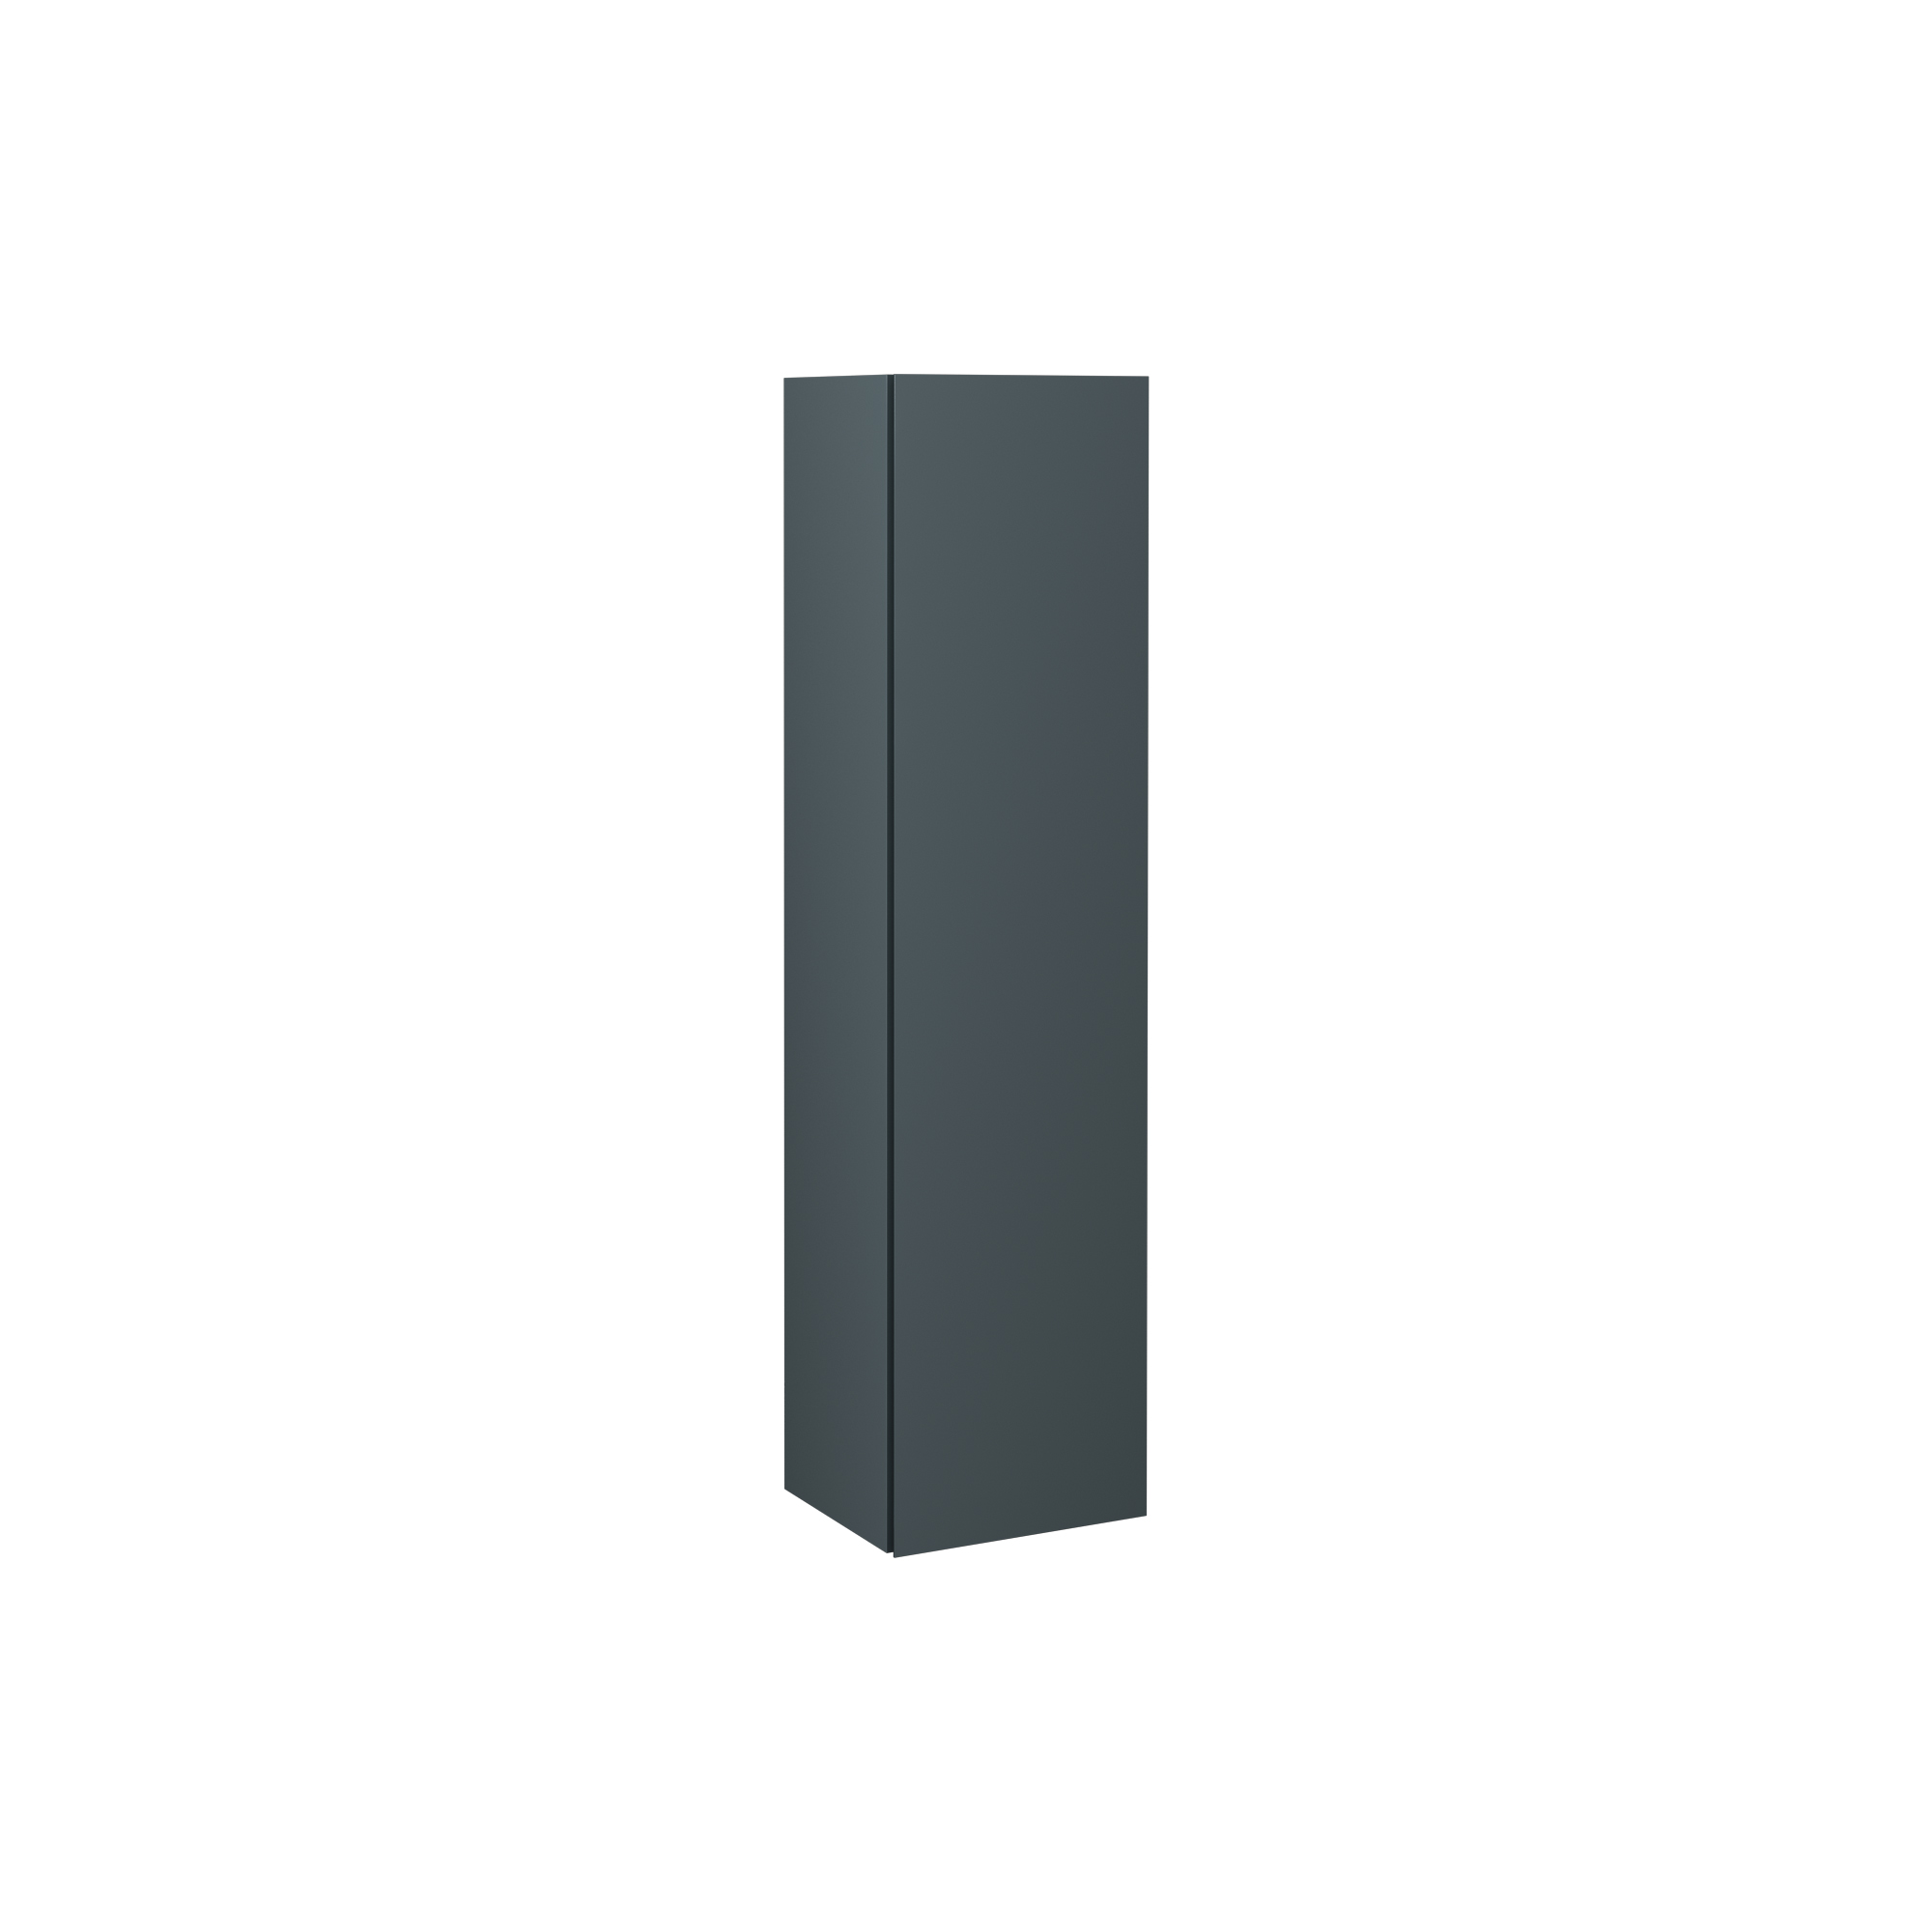 Pro 14" Tall Cabinet, Anthracite Right